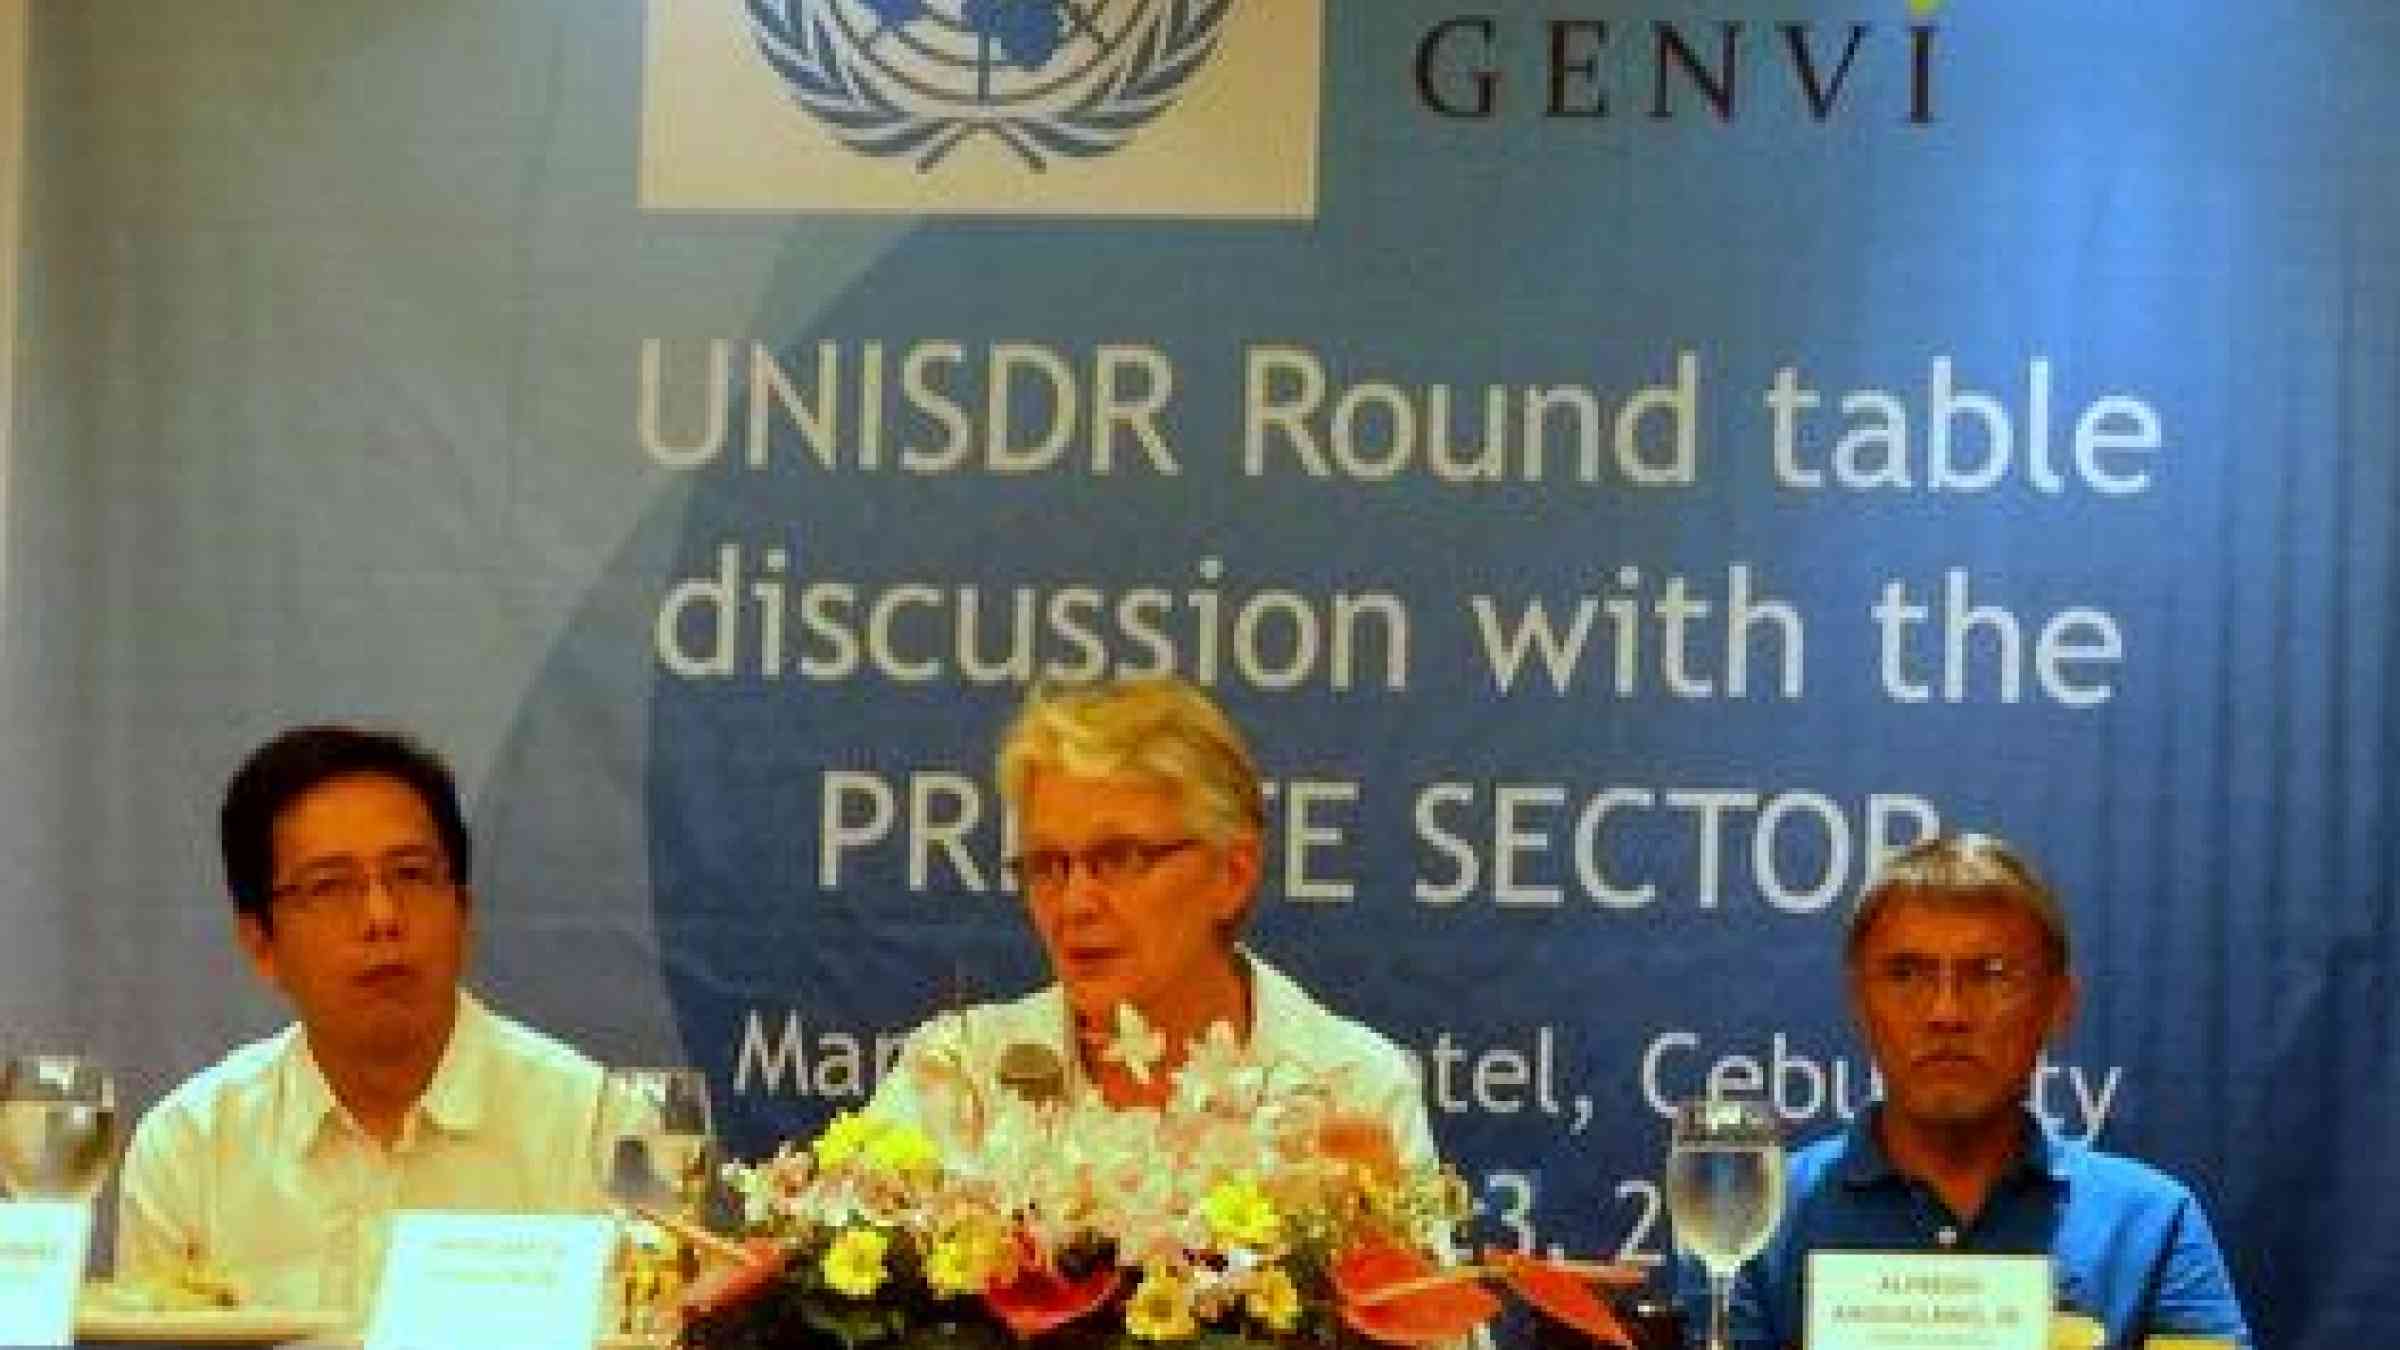 <b>'You have an opportunity to rebuild better and differently': </b>UNISDR Chief Ms Wahlström urges public and private sector leaders in Cebu to become a model of recovery partnership.